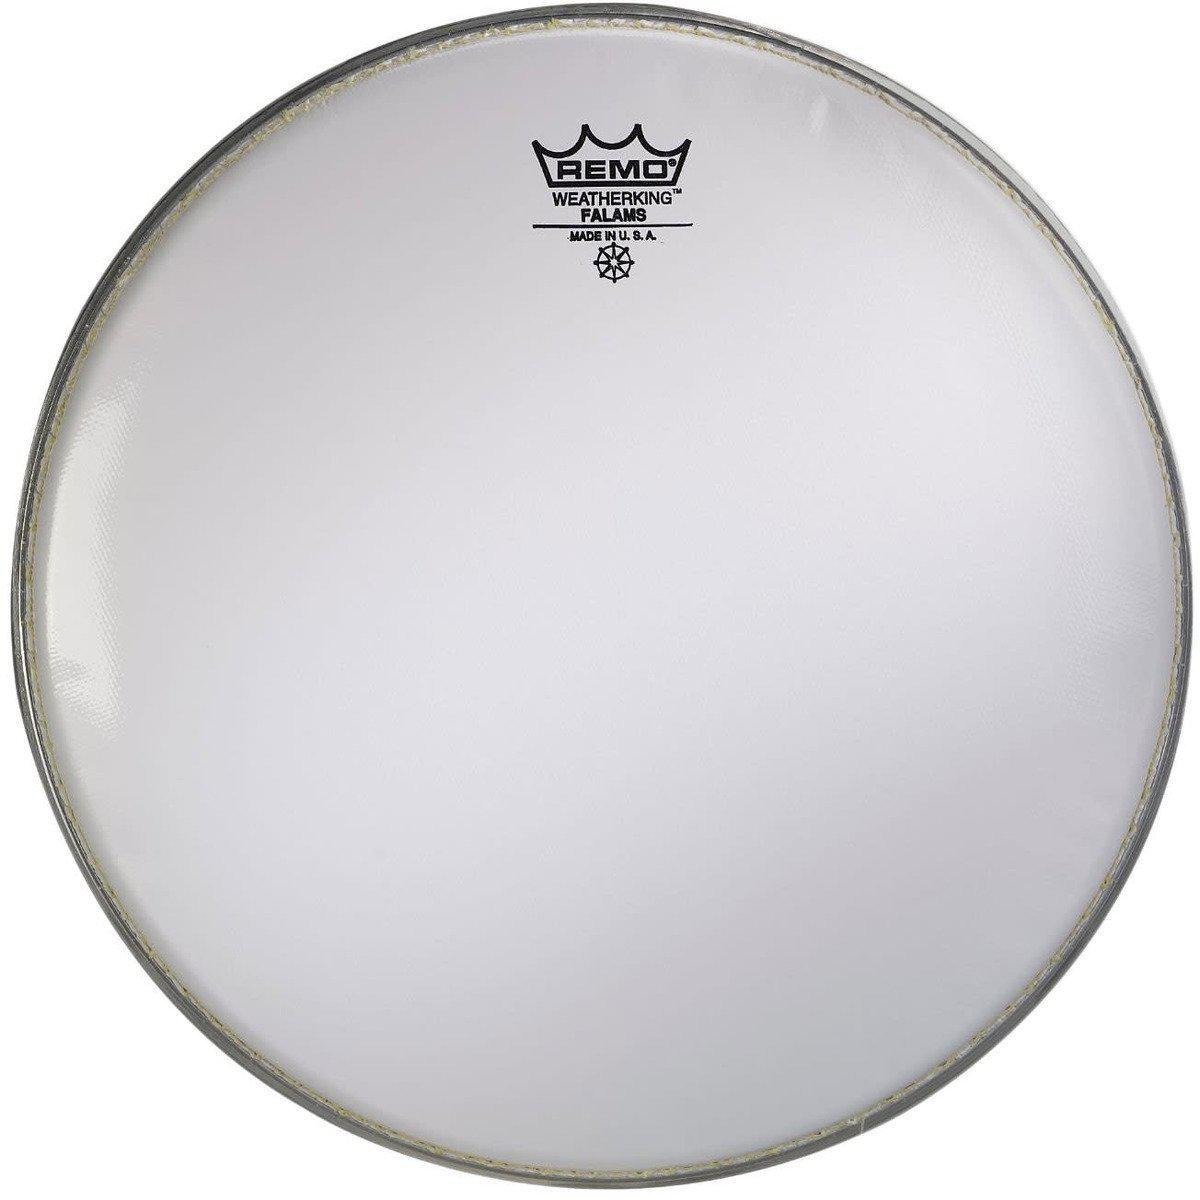 Remo Batter, Crimped, FALAMS® II, SMOOTH WHITE(TM), 13" Diameter-Andy's Music